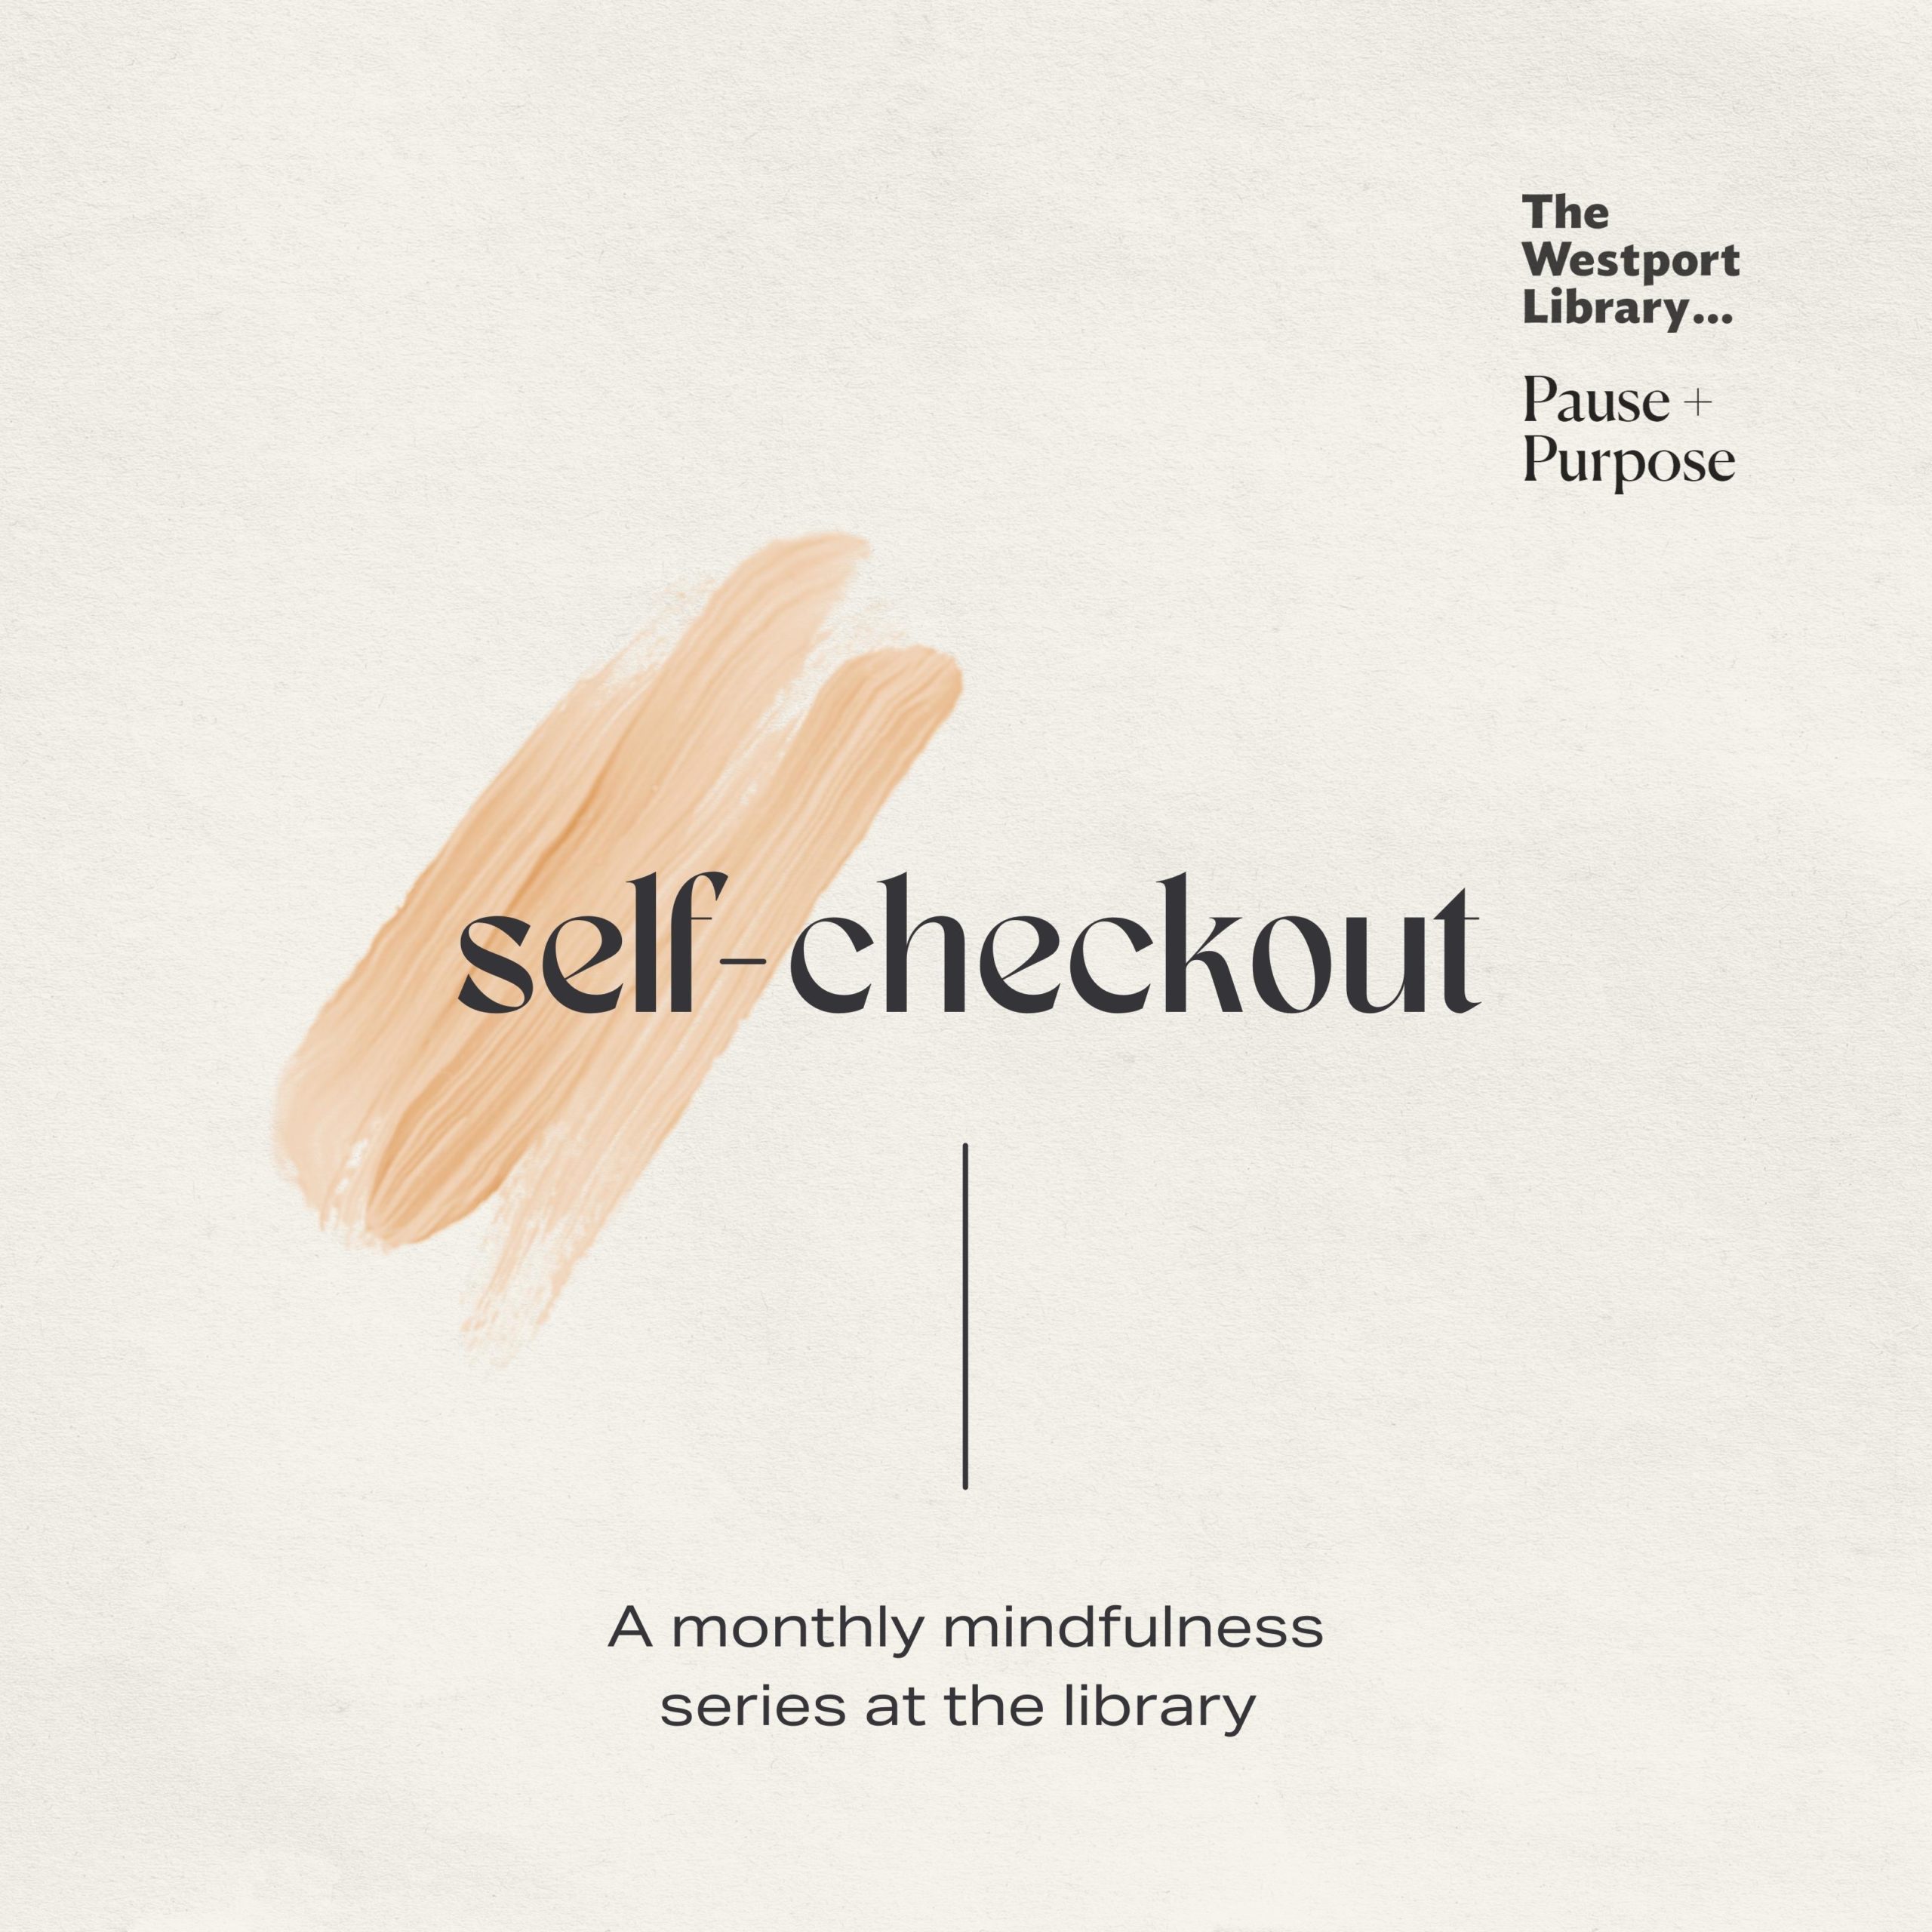 https://westportlibrary.org/wp-content/uploads/2022/02/self-checkout-3-scaled.jpg